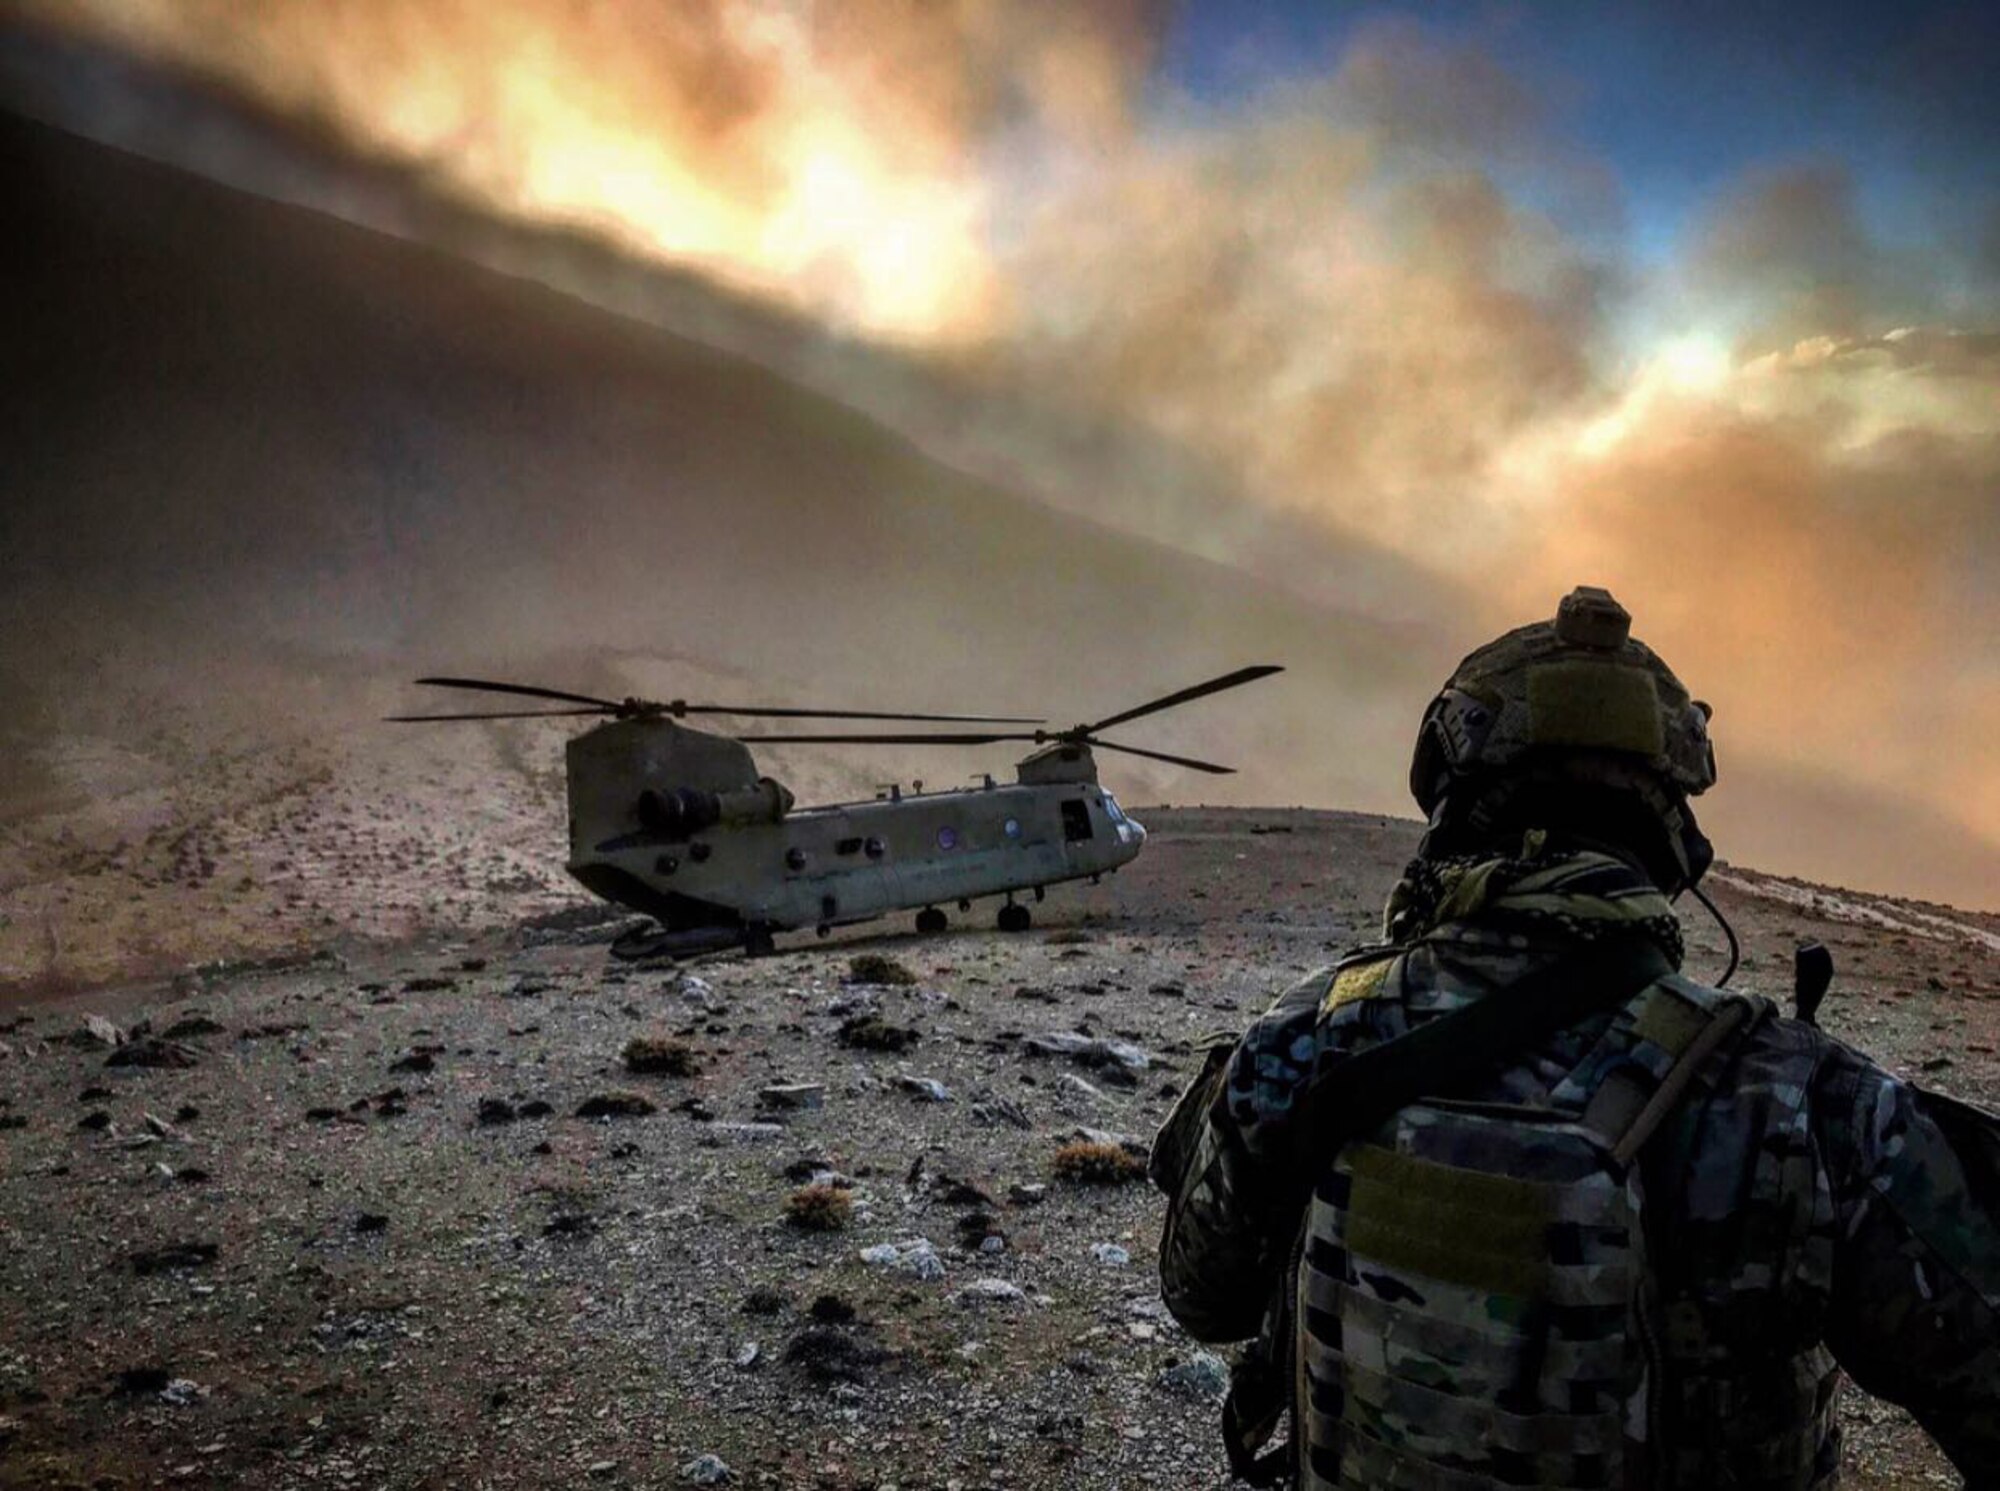 An 83rd Expeditionary Rescue Squadron Airman observes a U.S. Army CH-47 Chinook at an undisclosed location in Afghanistan. The 83rd ERQS is the Air Force Central Command’s first dedicated joint personnel recovery team, utilizing Air Force Guardian Angel teams and Army CH-47 Chinook crews. (U.S. Air Force courtesy photo)